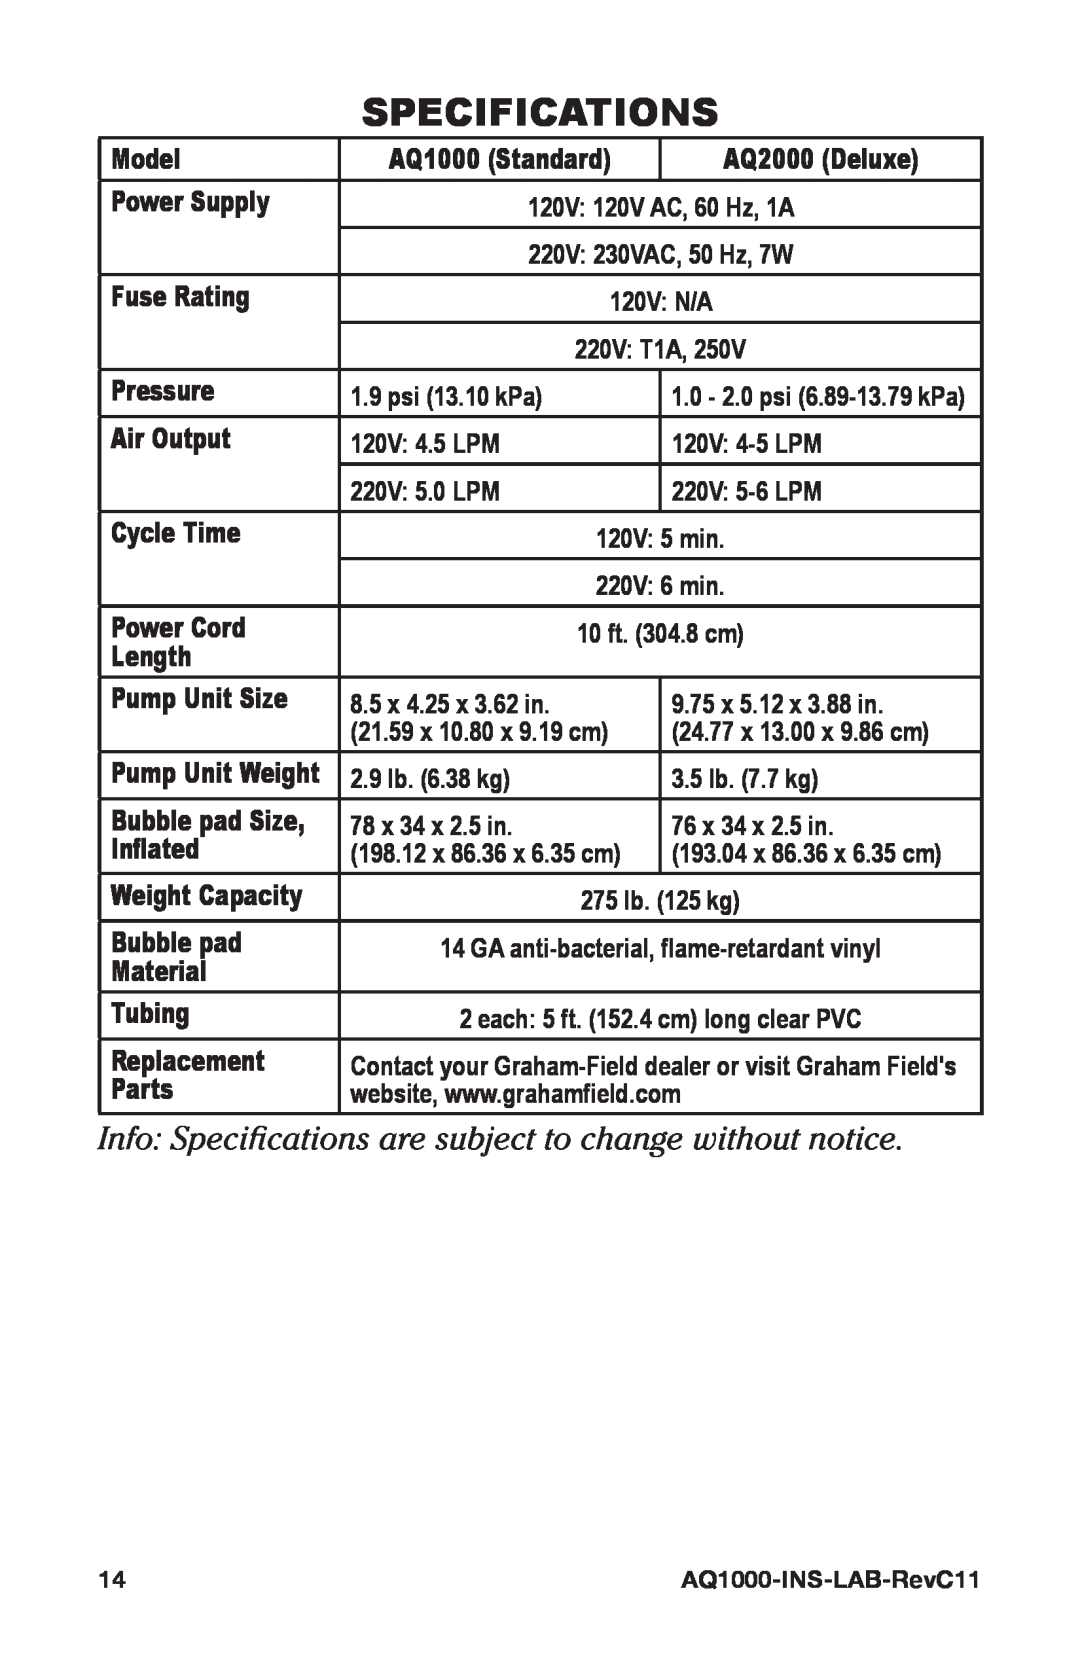 Graham Field AQ1000/AQ2000 user manual Info Specifications are subject to change without notice 